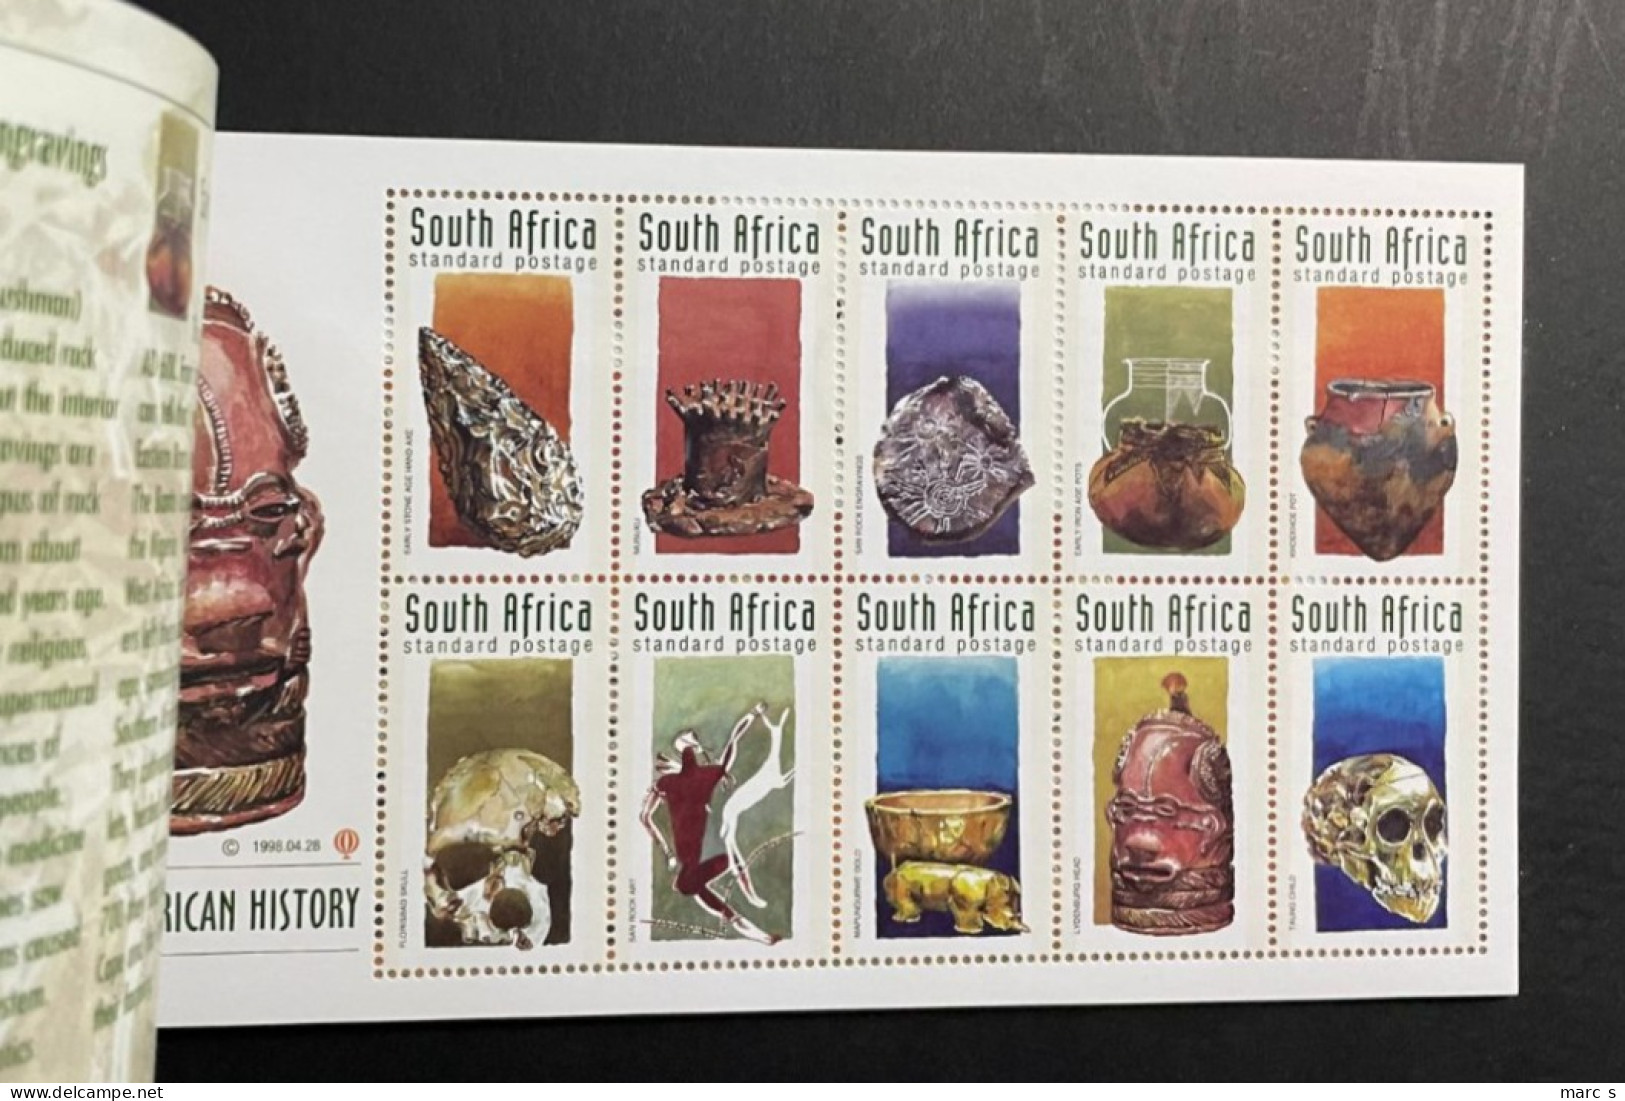 SOUTH AFRICA 1998 - NEUF**/MNH - LUXE - Booklet Carnet Markenheftchen No 3 -  8 Pages - 2 X Mi 1130 / 1139 - Carnets